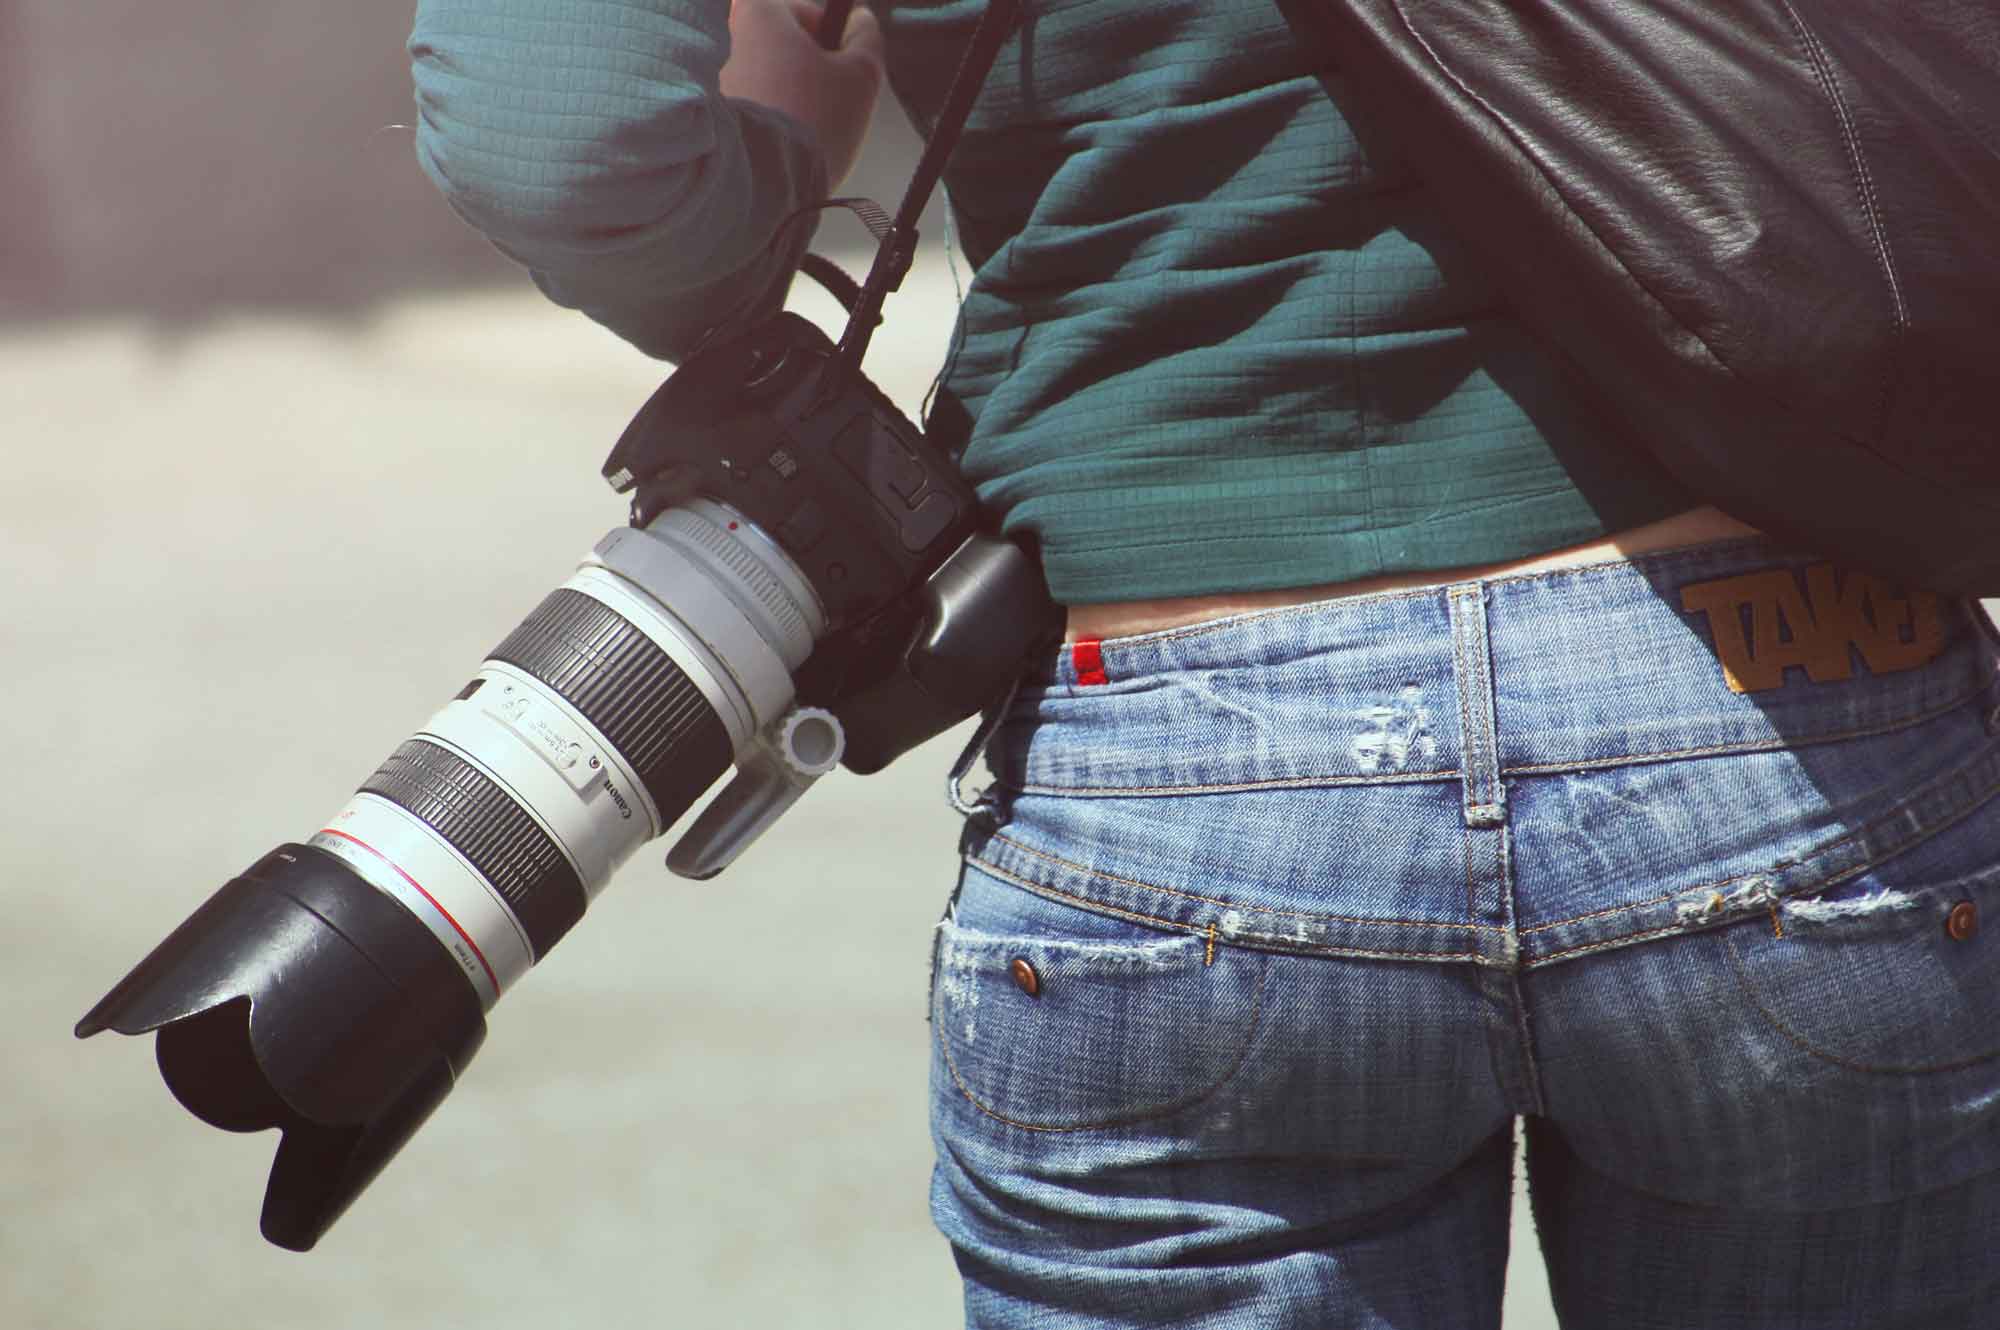 10 Essential Things You'll Need To Start A Successful Photography Business